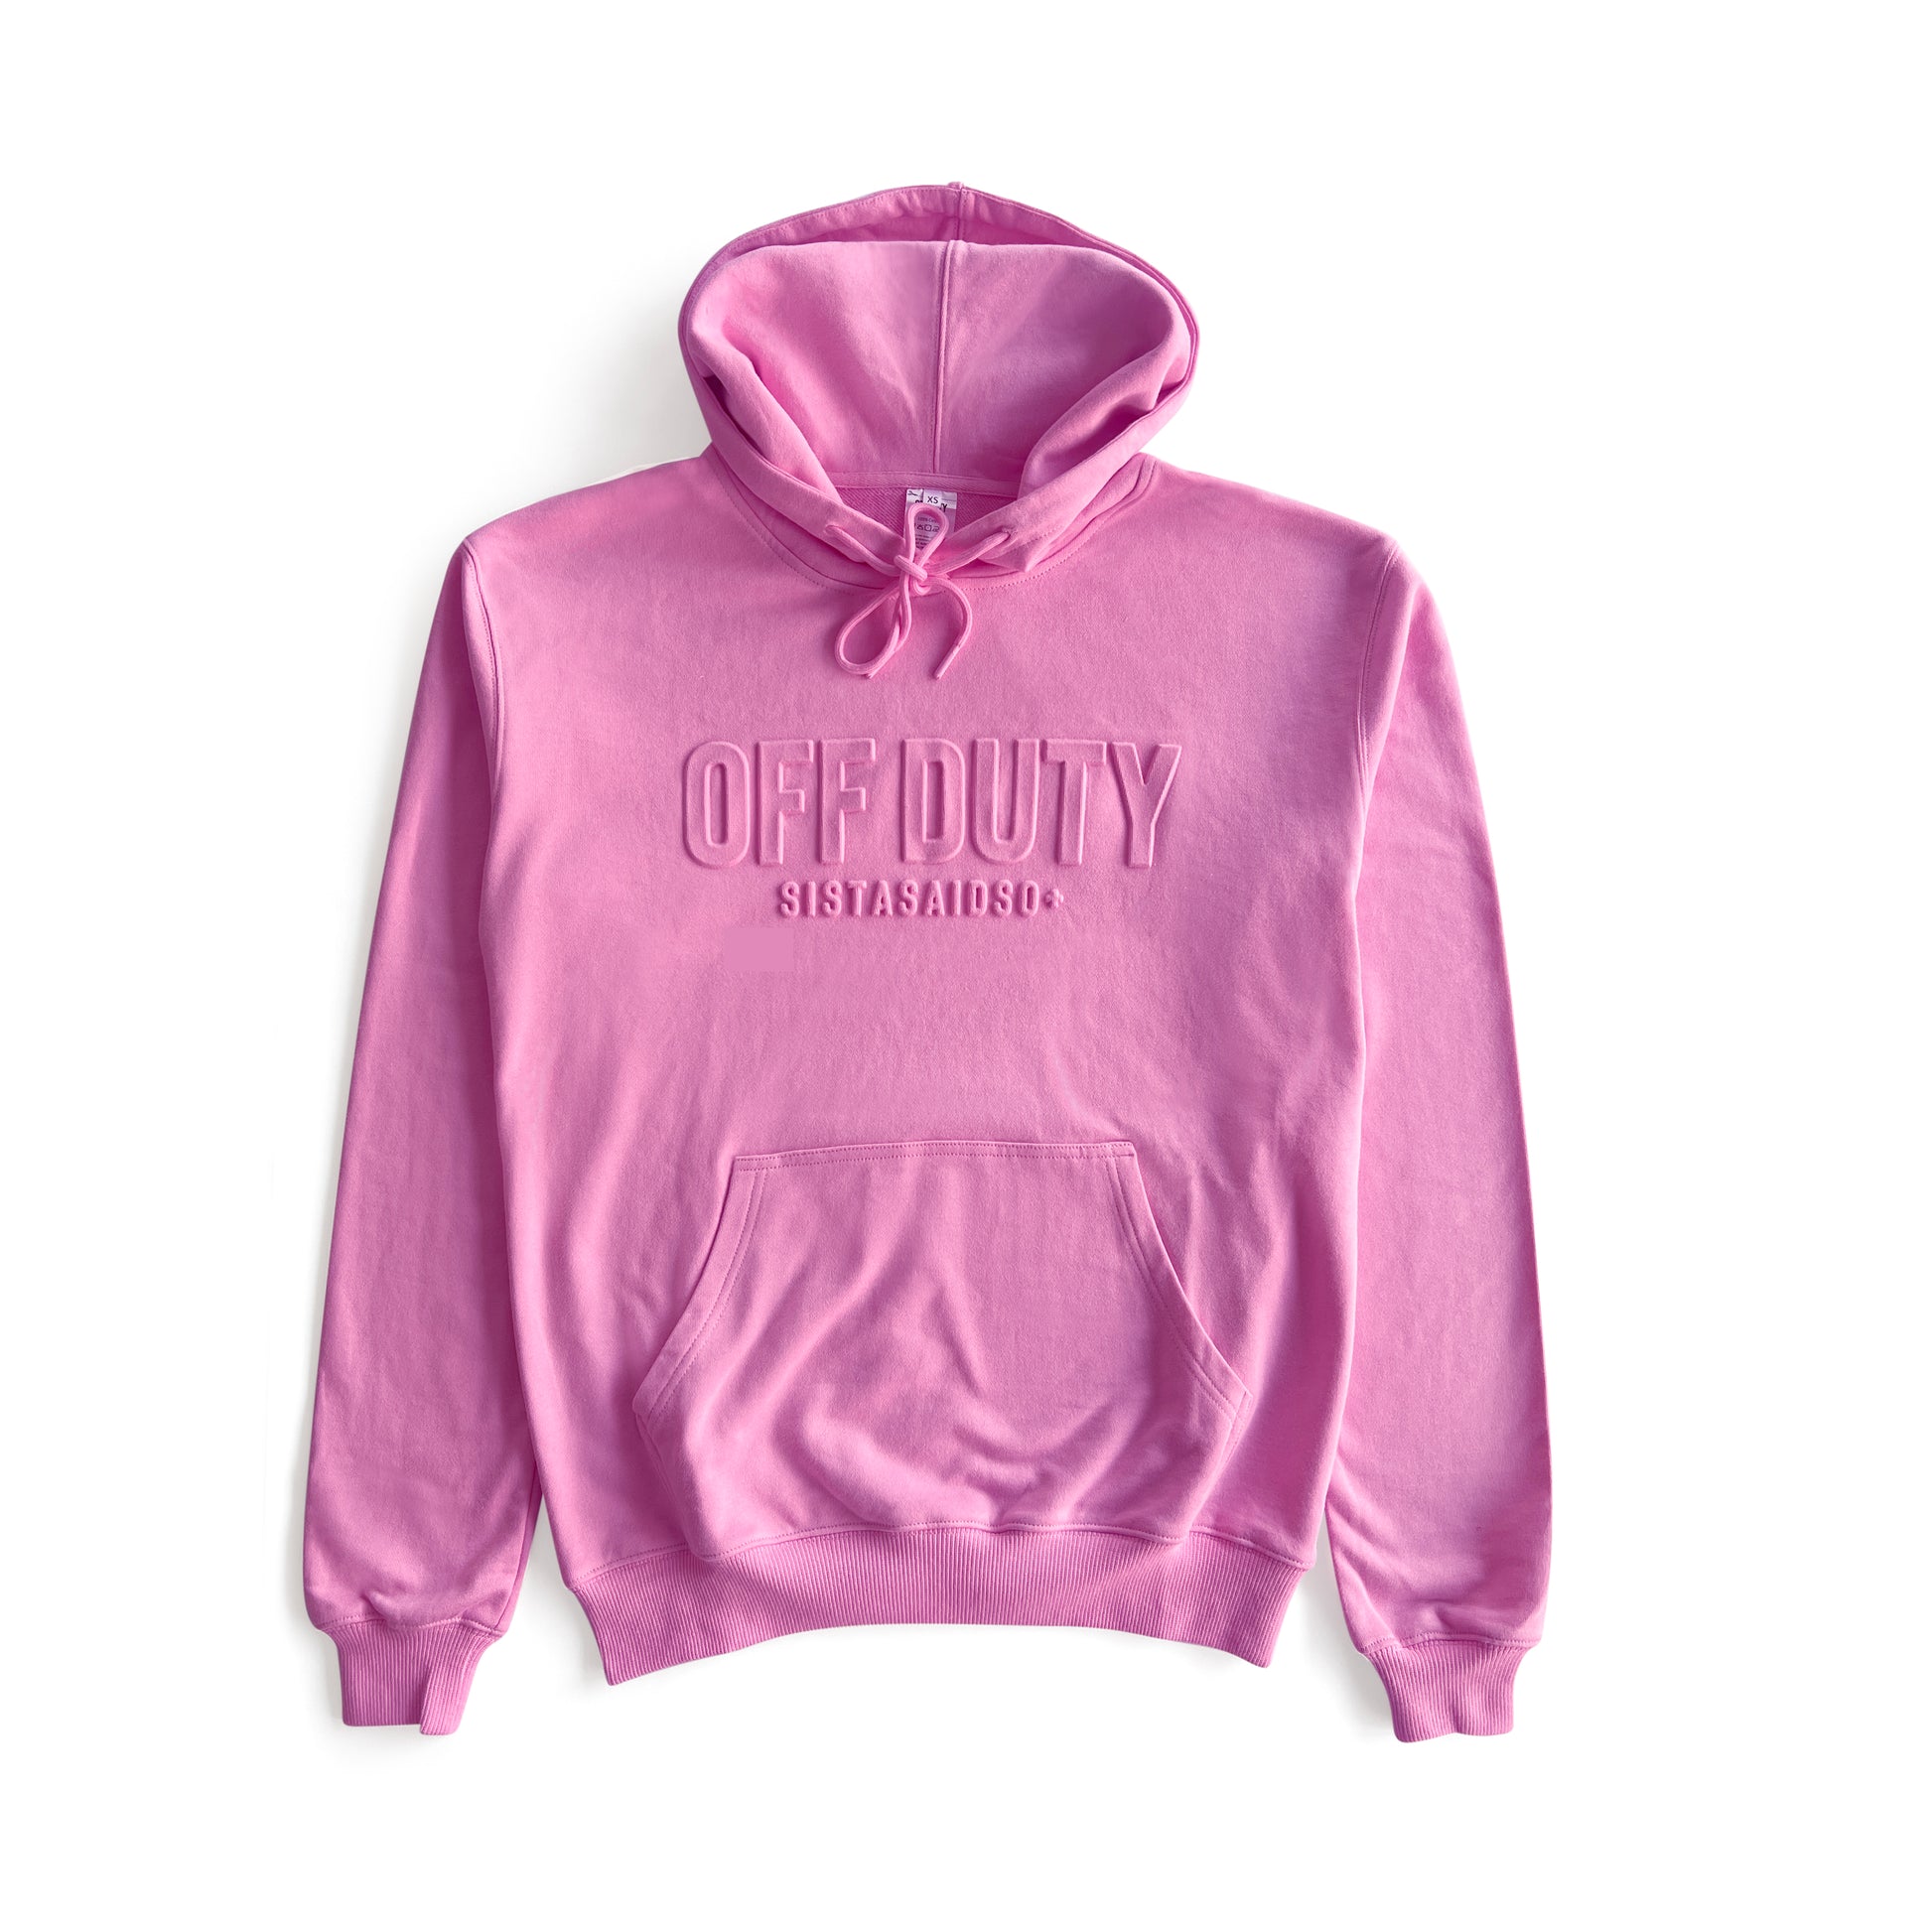 OFF DUTY™️ Unisex Cupcake nurse Hoodie and nurses accessory from Sistasaidso flat lay